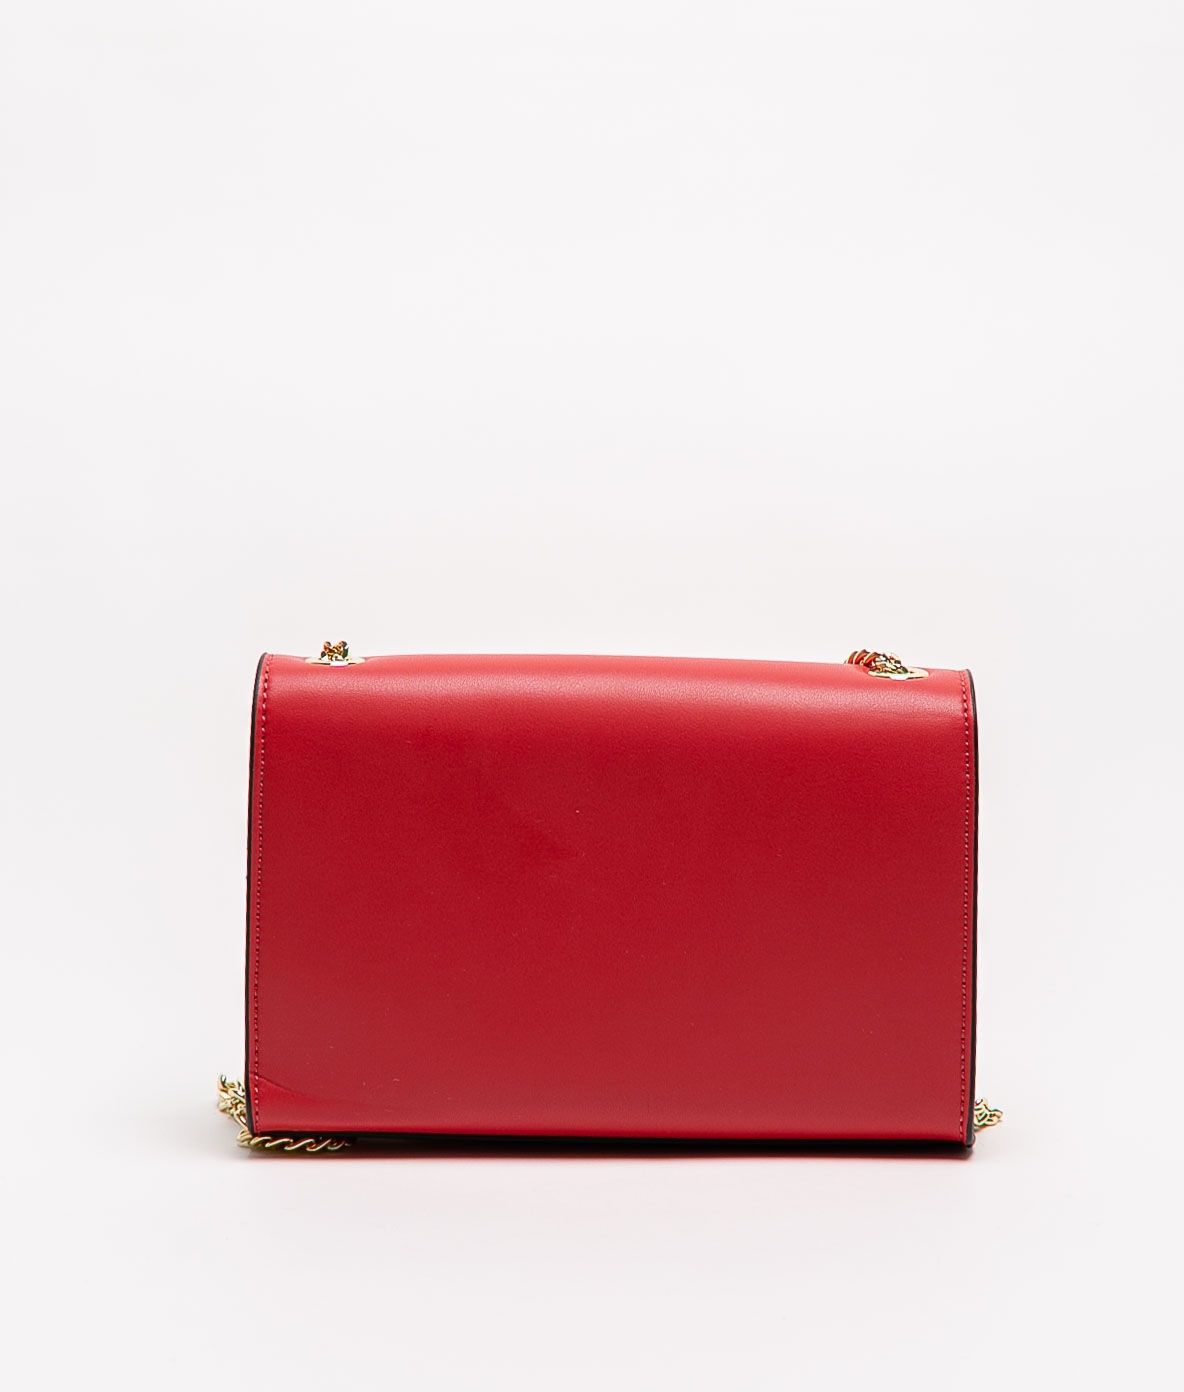 CHALO BAG - RED